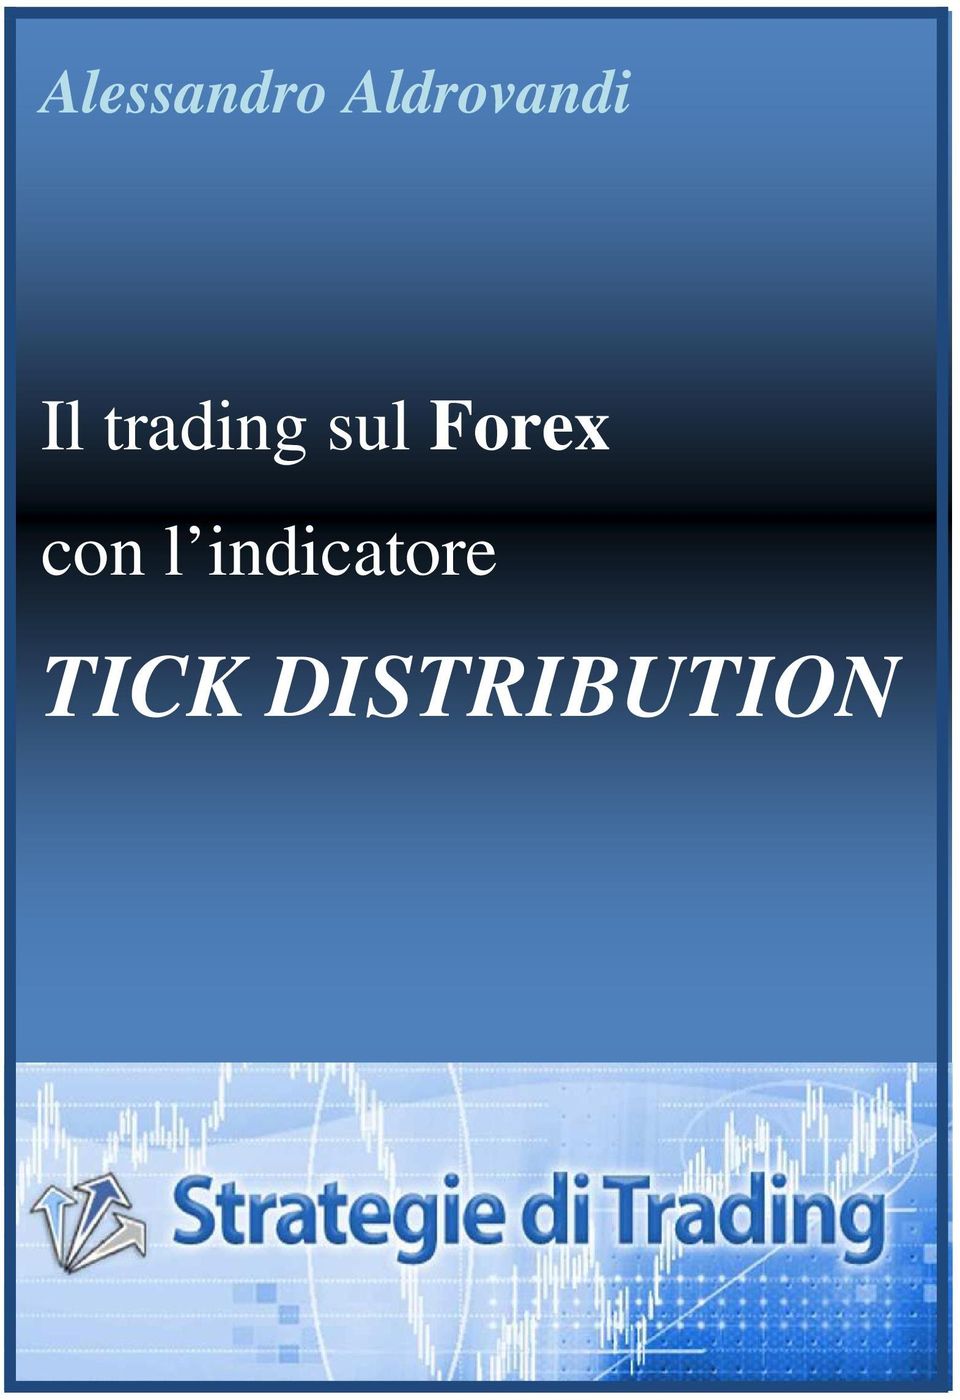 trading sul Forex